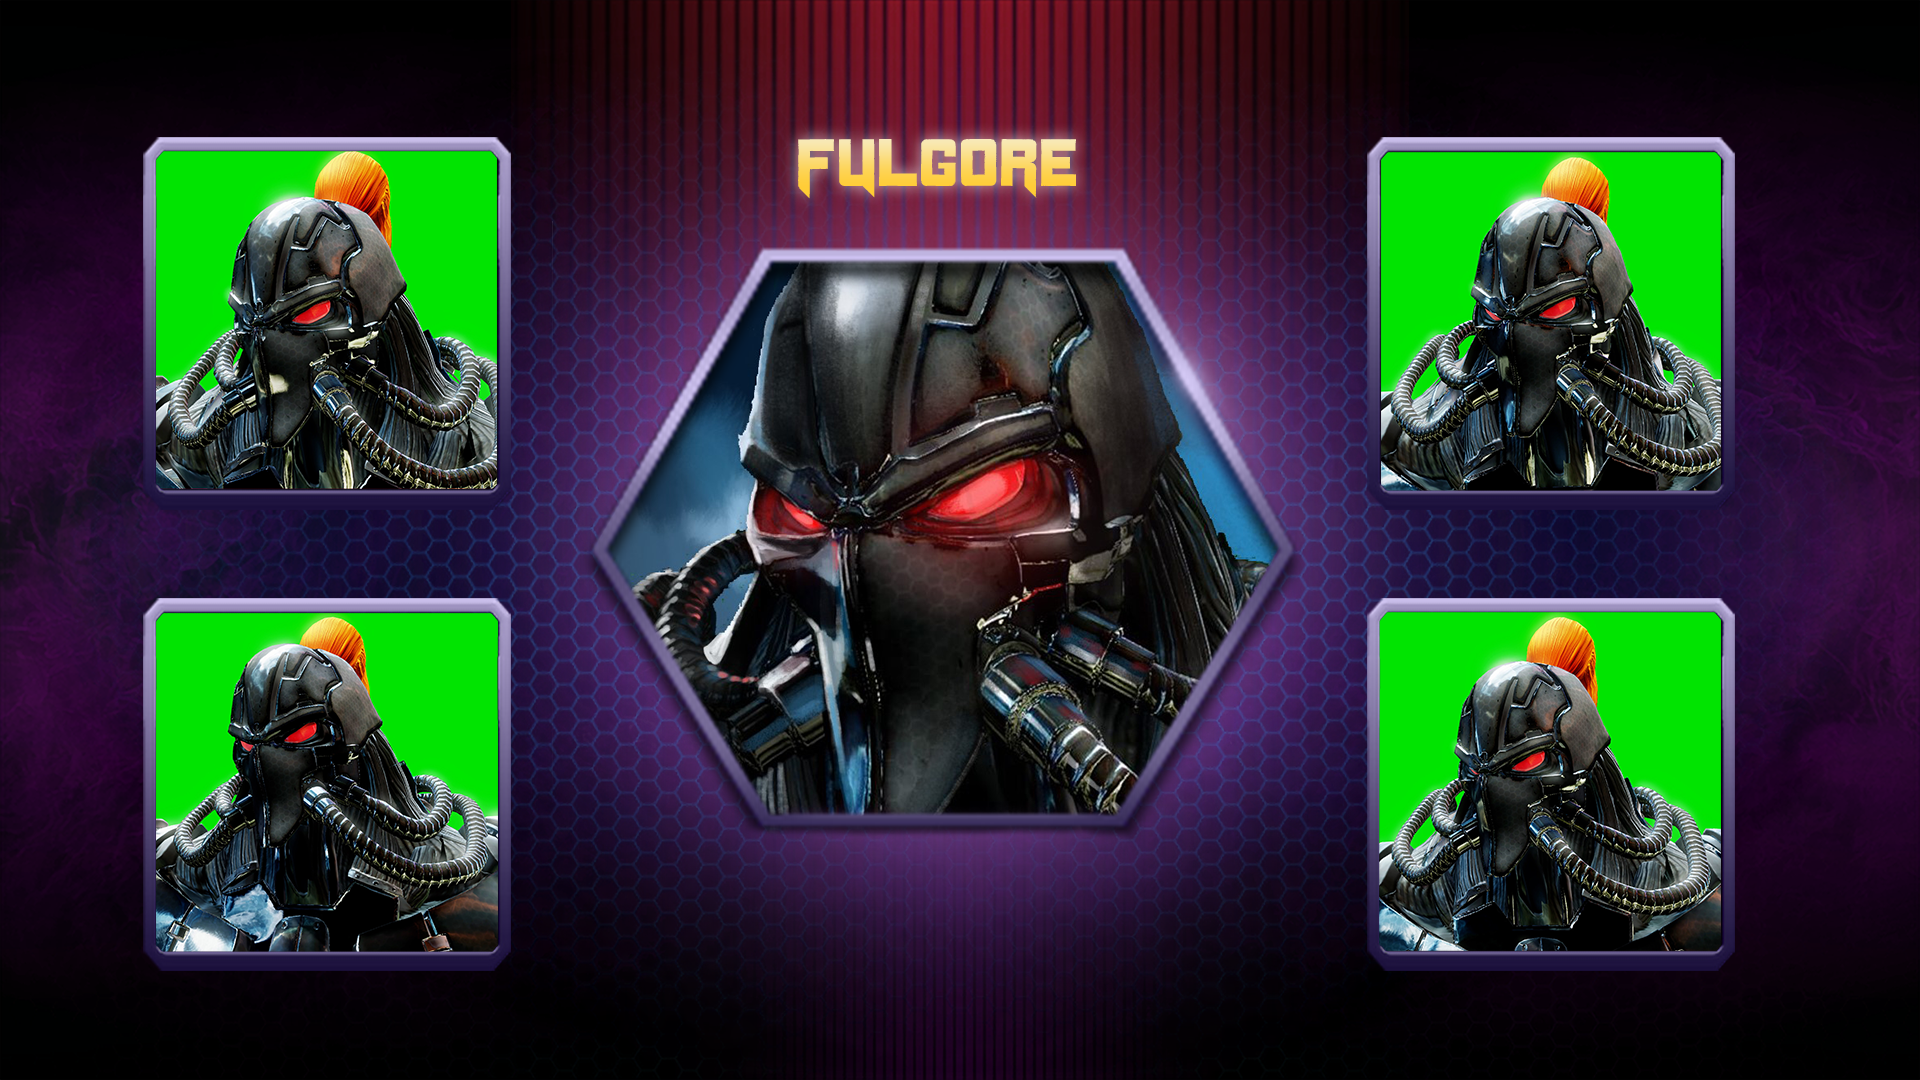 Fulgore's final character icon positioned in the center of the image, surrounded by 4 smaller images of different reference frames used to create the final image.